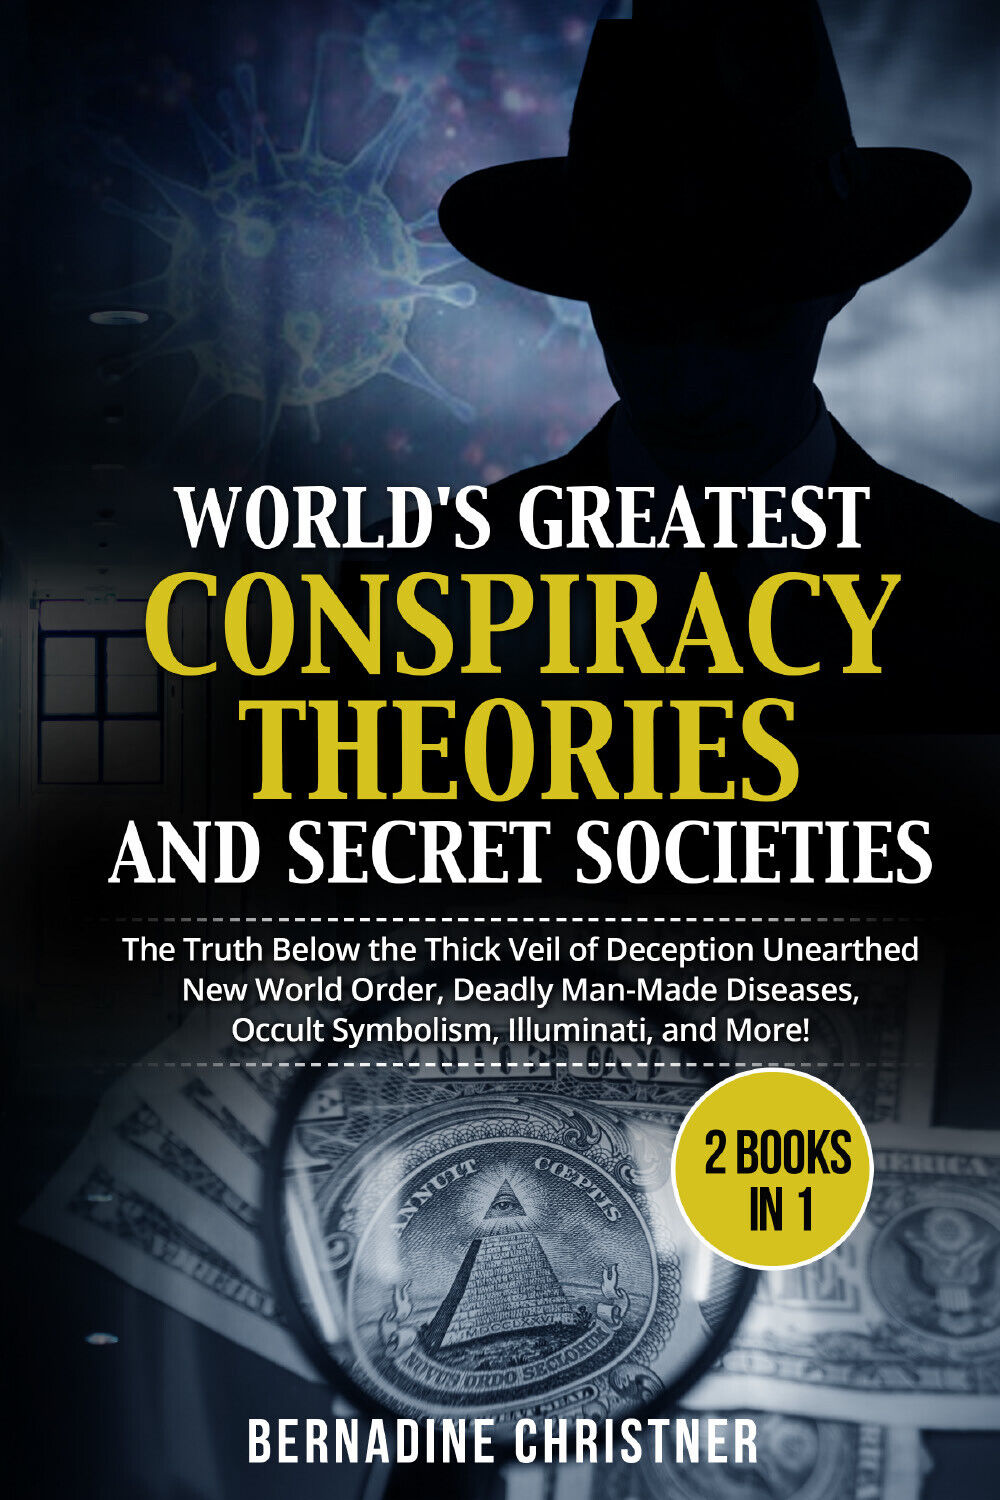 World's greatest conspiracy theories and secret societies (2 Books in 1). The Tr